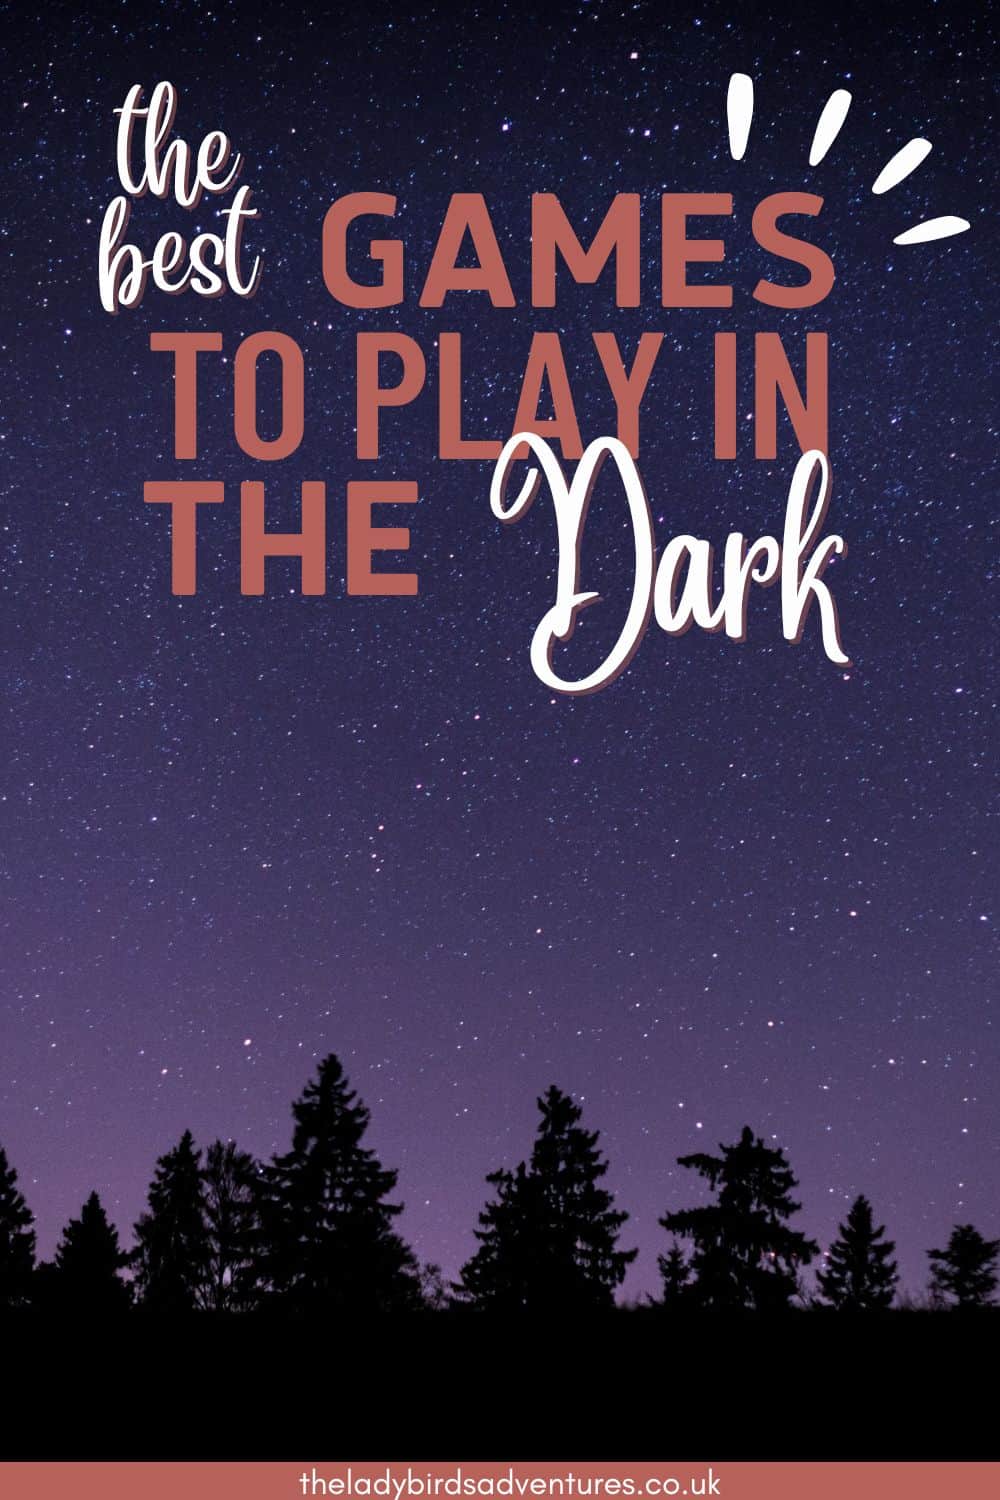 Night sky with tree silhouettes. Text reads the best games to play in the dark